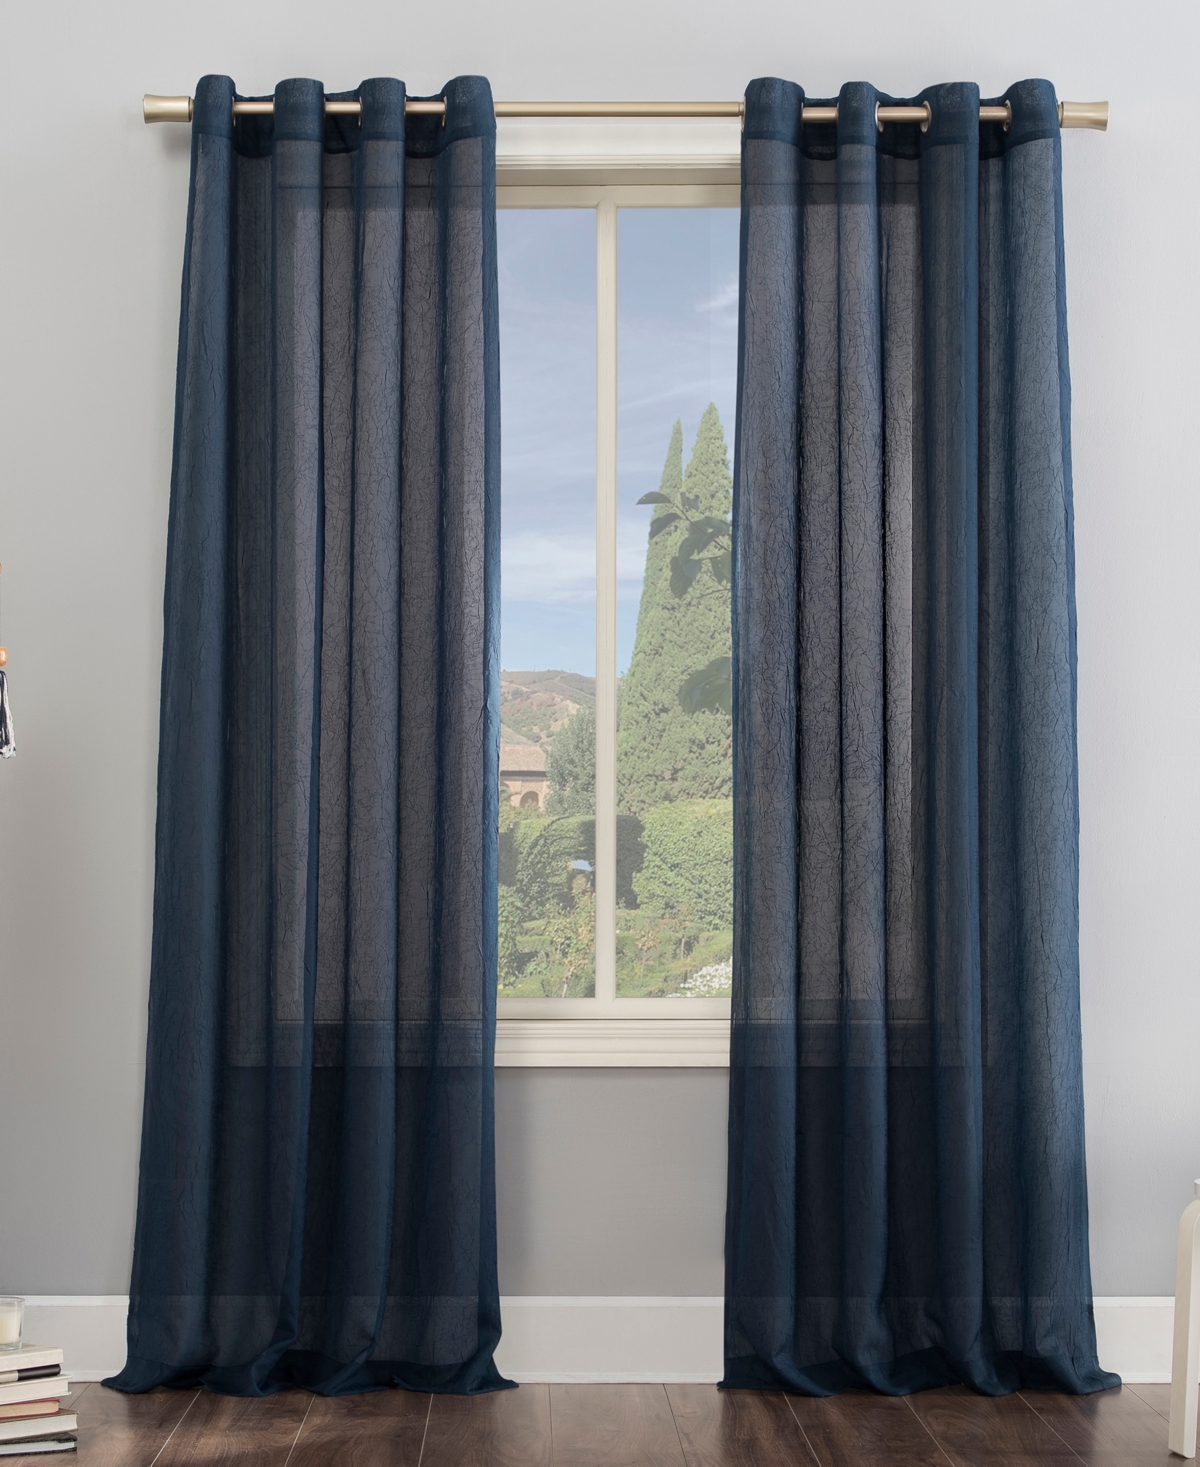 No. 918 Erica Crushed Voile Sheer Grommet Single Curtain Panel, 51" X 63" In Navy